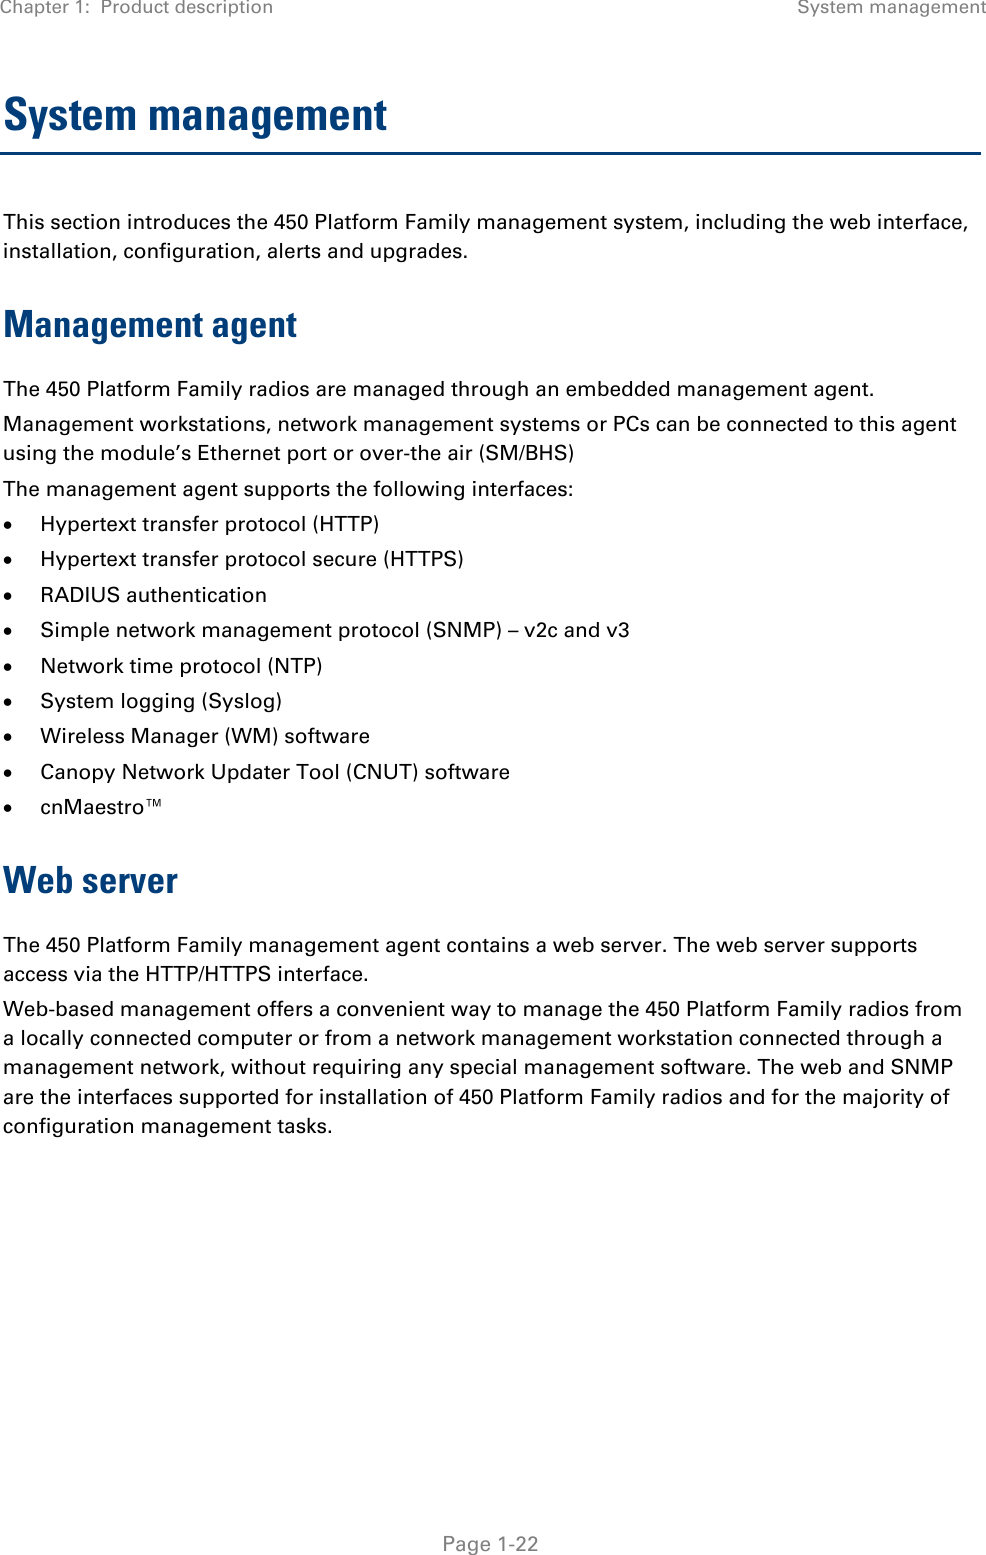 Chapter 1:  Product description System management   Page 1-22 System management This section introduces the 450 Platform Family management system, including the web interface, installation, configuration, alerts and upgrades. Management agent The 450 Platform Family radios are managed through an embedded management agent.  Management workstations, network management systems or PCs can be connected to this agent using the module’s Ethernet port or over-the air (SM/BHS)  The management agent supports the following interfaces:  • Hypertext transfer protocol (HTTP)  • Hypertext transfer protocol secure (HTTPS) • RADIUS authentication  • Simple network management protocol (SNMP) – v2c and v3 • Network time protocol (NTP)  • System logging (Syslog)  • Wireless Manager (WM) software  • Canopy Network Updater Tool (CNUT) software  • cnMaestro™ Web server The 450 Platform Family management agent contains a web server. The web server supports access via the HTTP/HTTPS interface. Web-based management offers a convenient way to manage the 450 Platform Family radios from a locally connected computer or from a network management workstation connected through a management network, without requiring any special management software. The web and SNMP are the interfaces supported for installation of 450 Platform Family radios and for the majority of  configuration management tasks.    